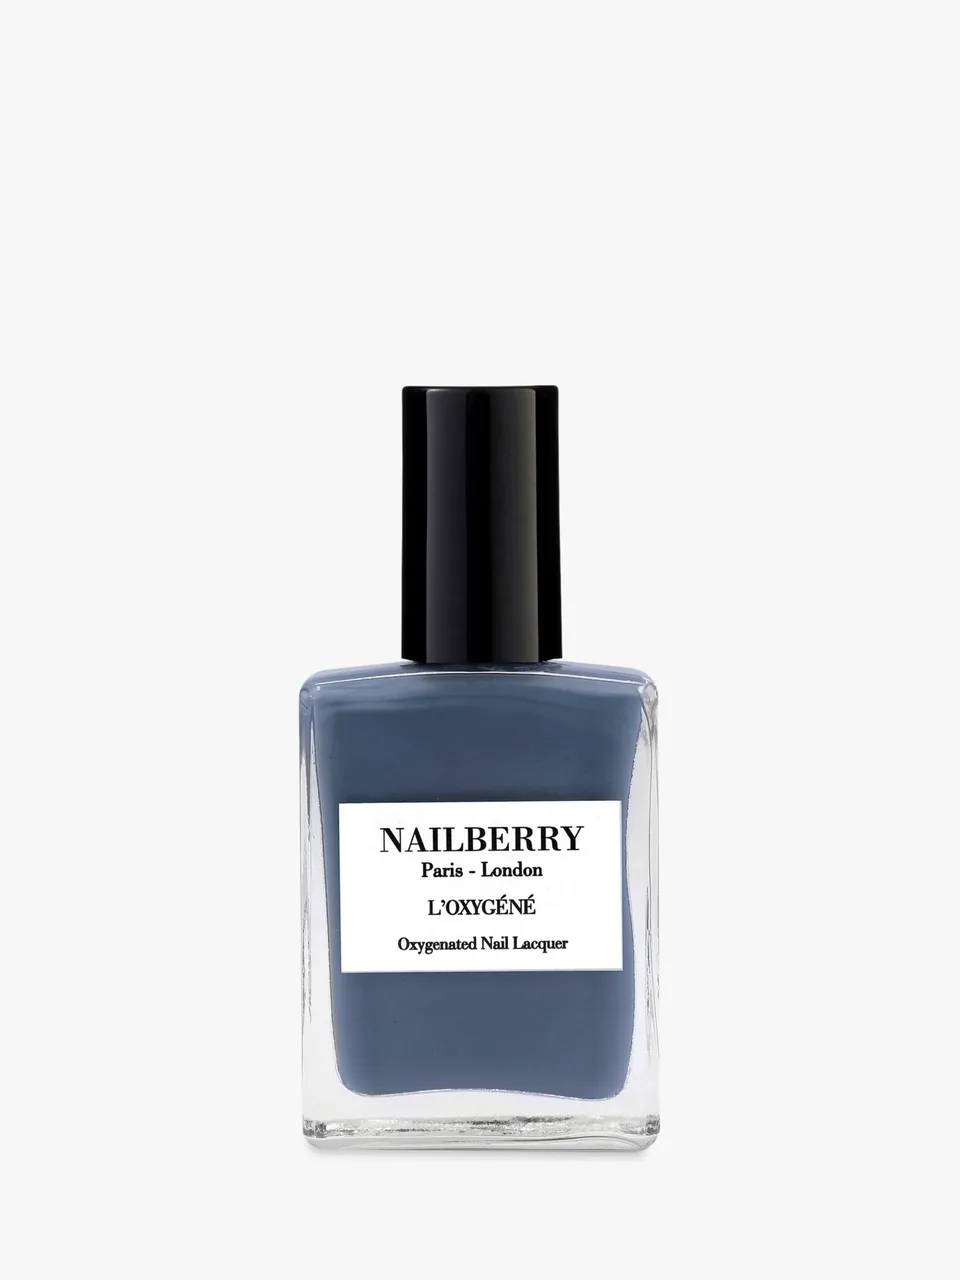 Nailberry L'OxygÃ©nÃ© Oxygenated Nail Lacquer - Spiritual - Unisex - Size: 15ml